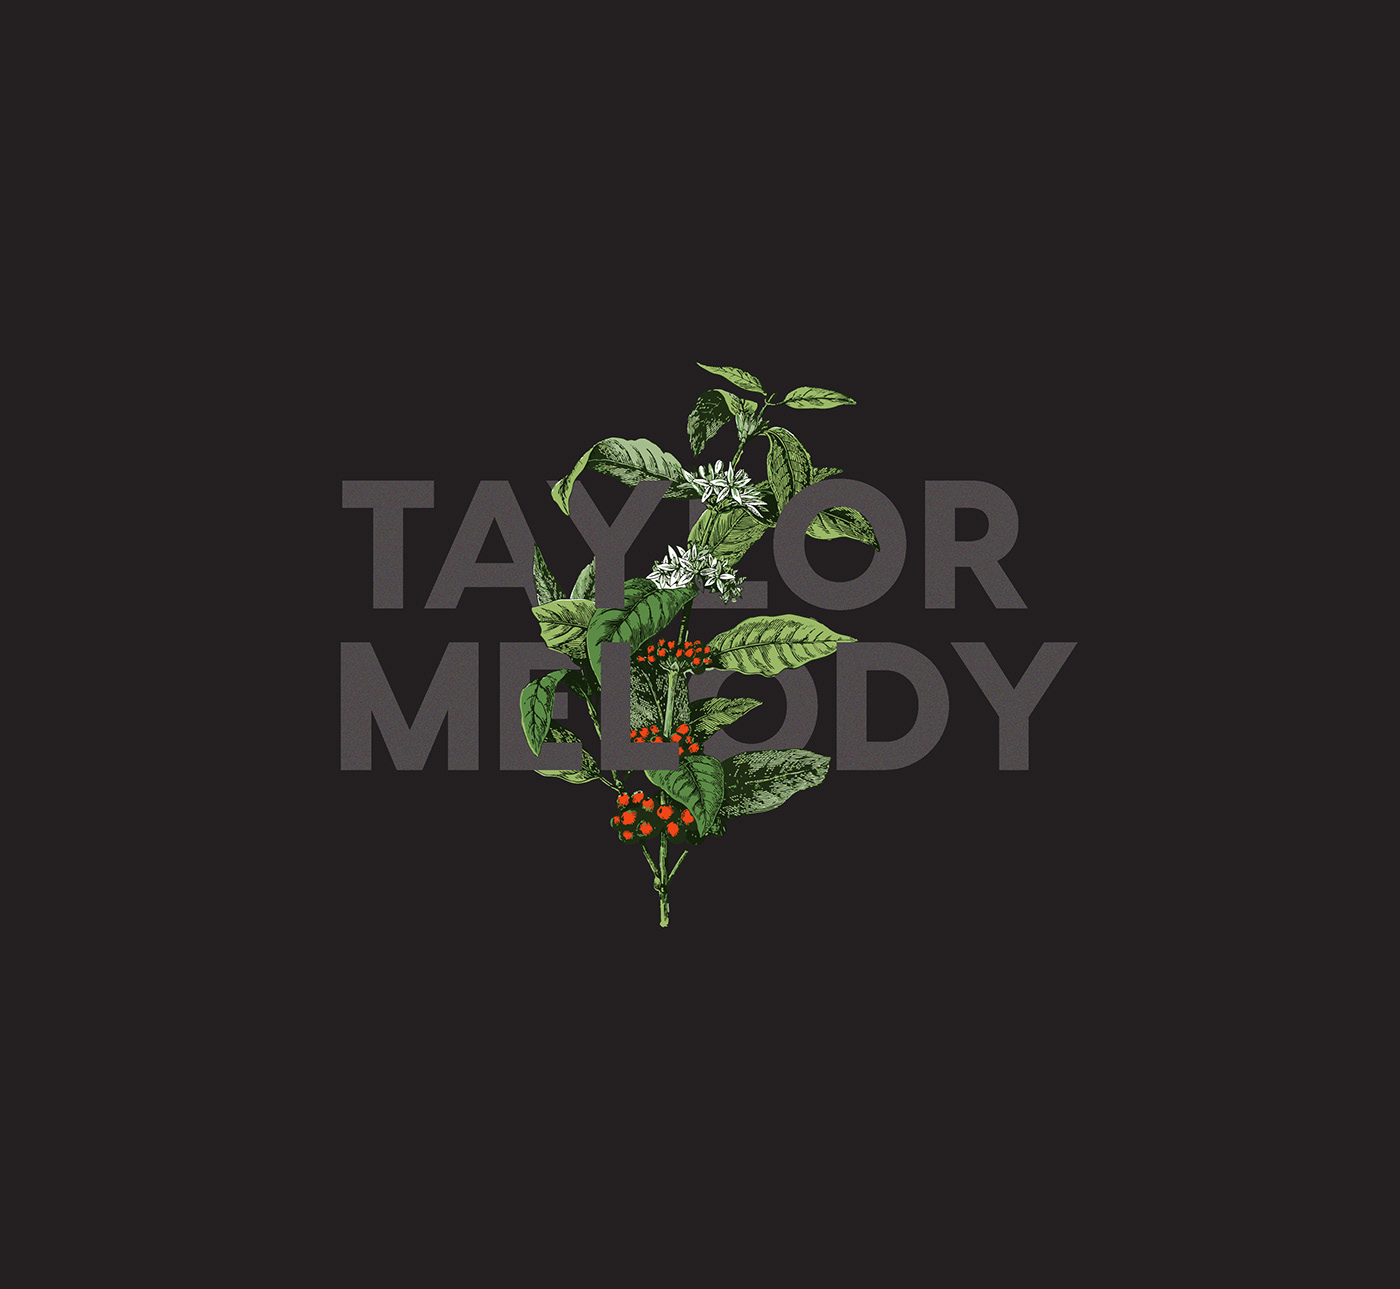 Coffee taylor melody Plant floral branding  design business dark